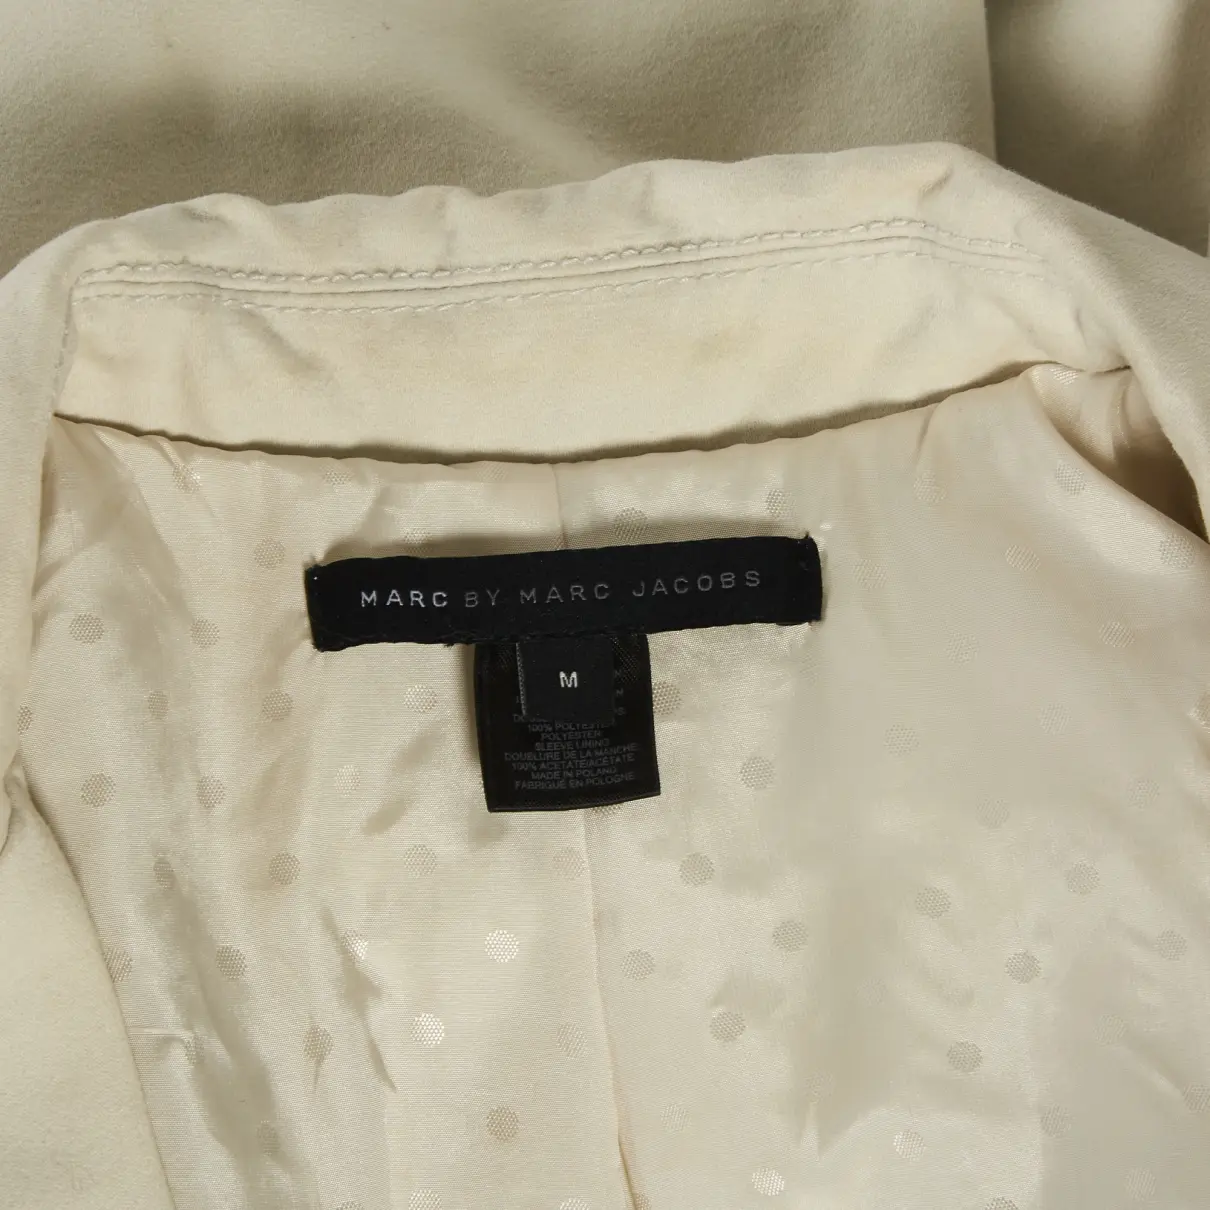 Buy Marc by Marc Jacobs Trench coat online